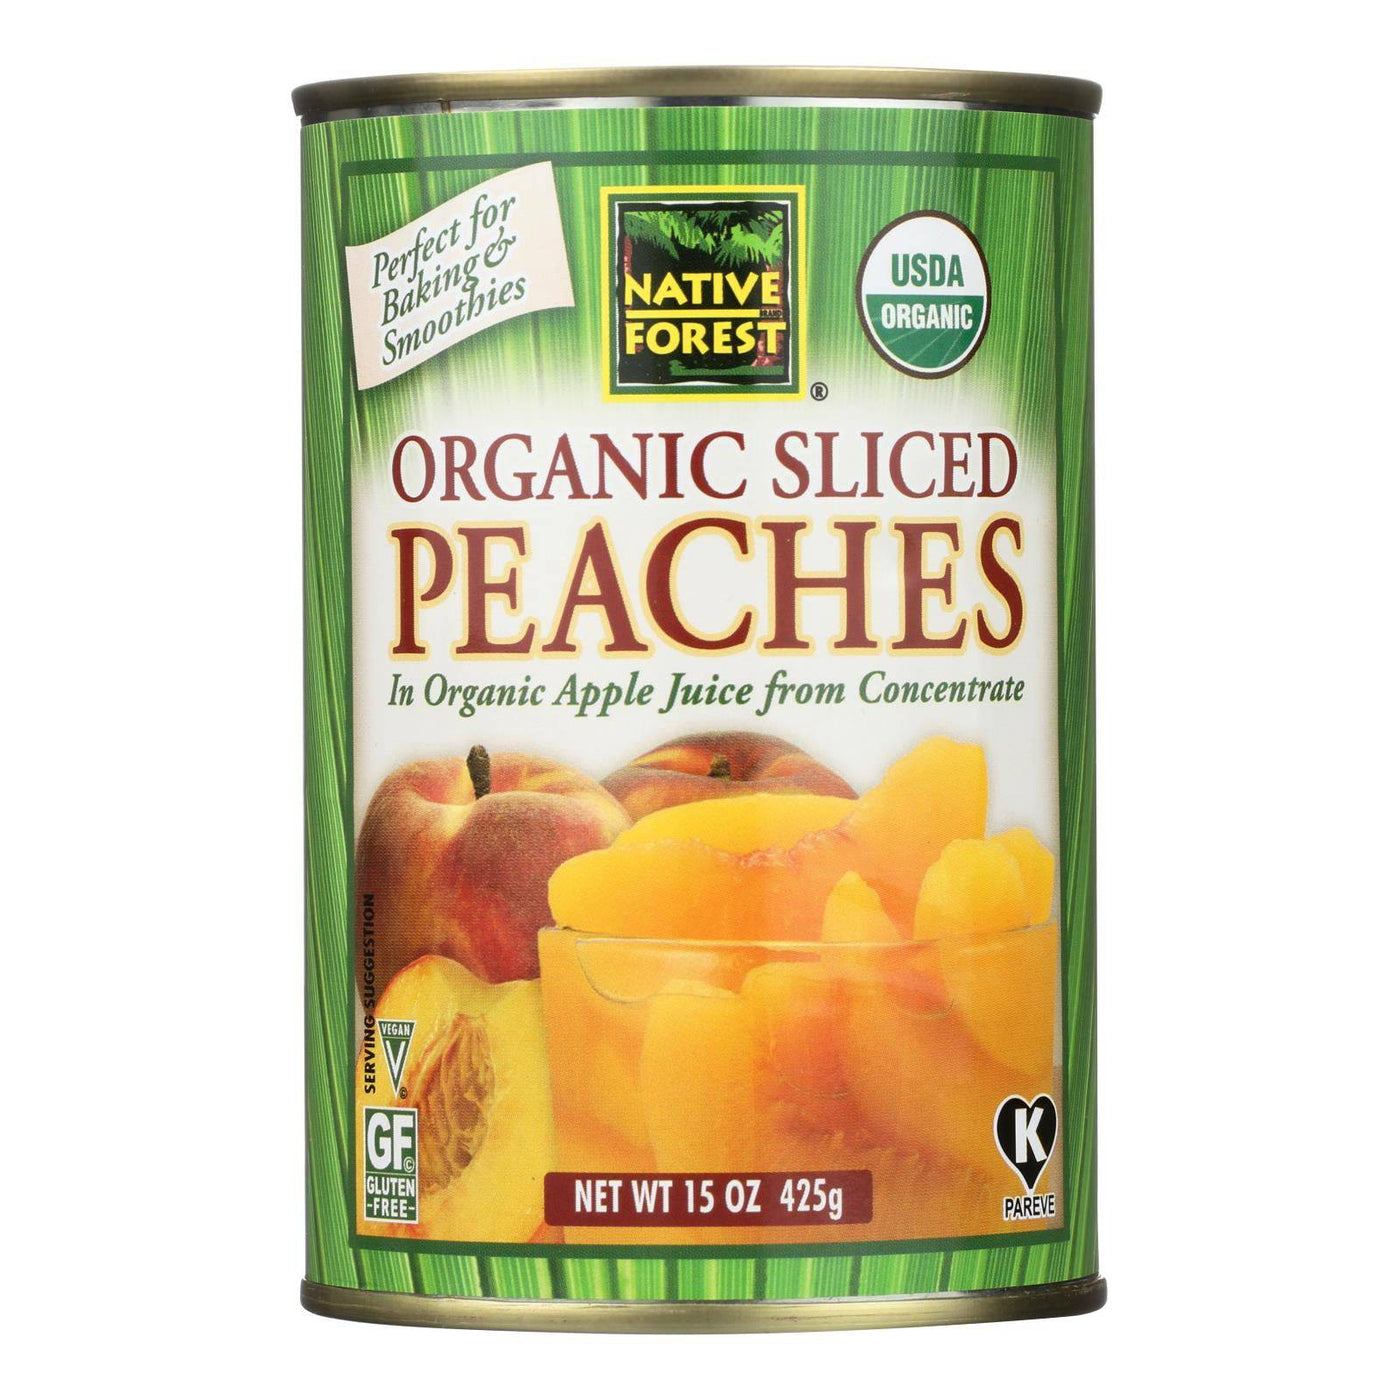 Native Forest Organic Sliced - Peaches - Case Of 6 - 15 Oz. | OnlyNaturals.us